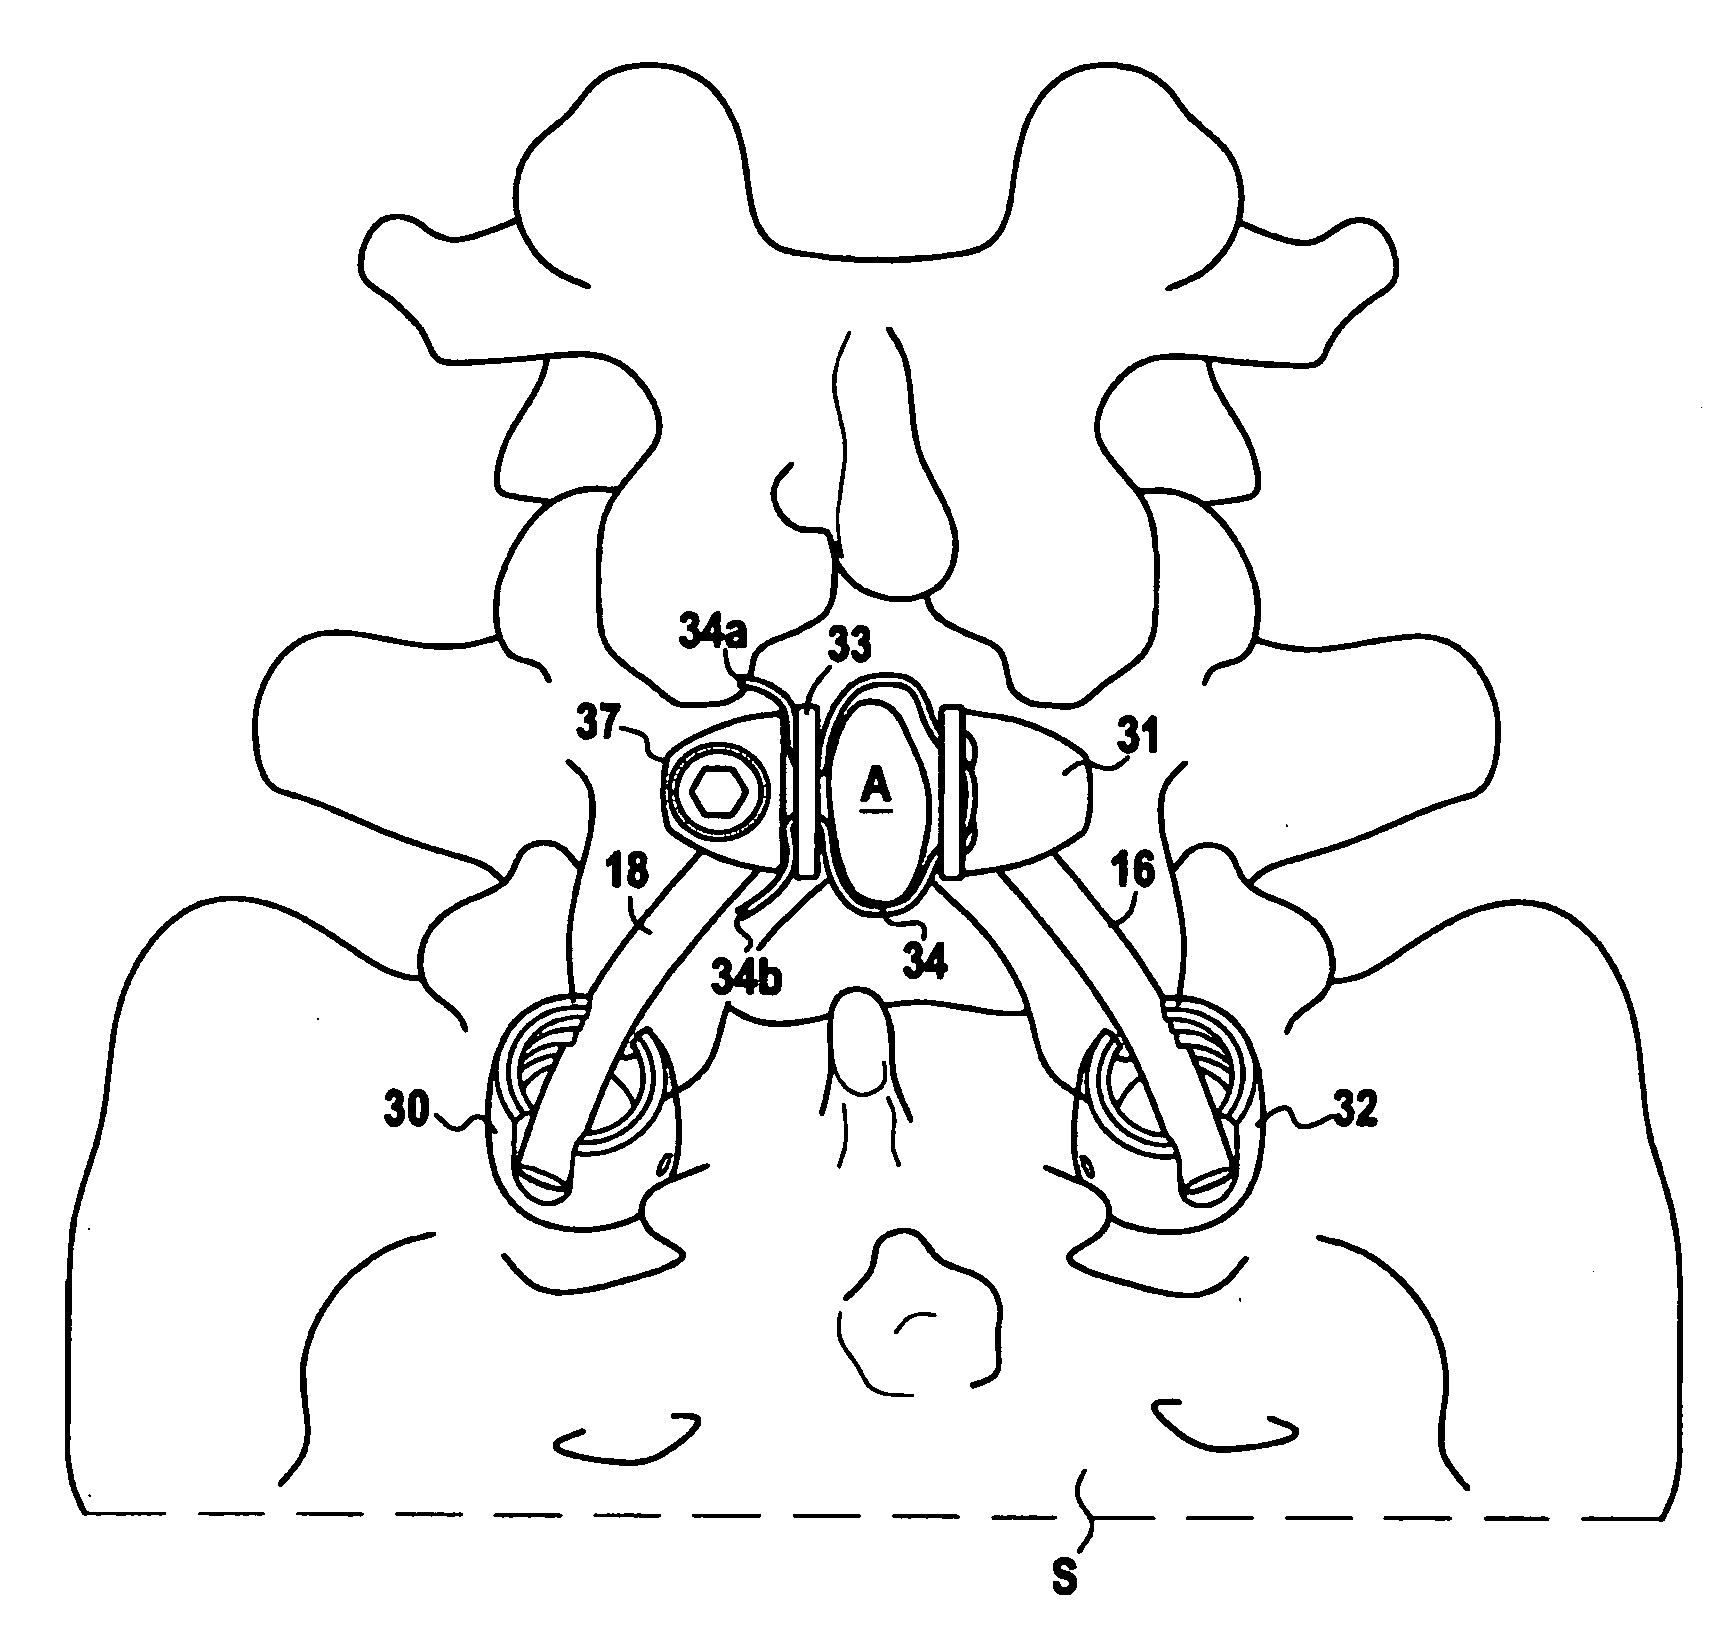 System for Stabilizing at Least a Portion of the Spine